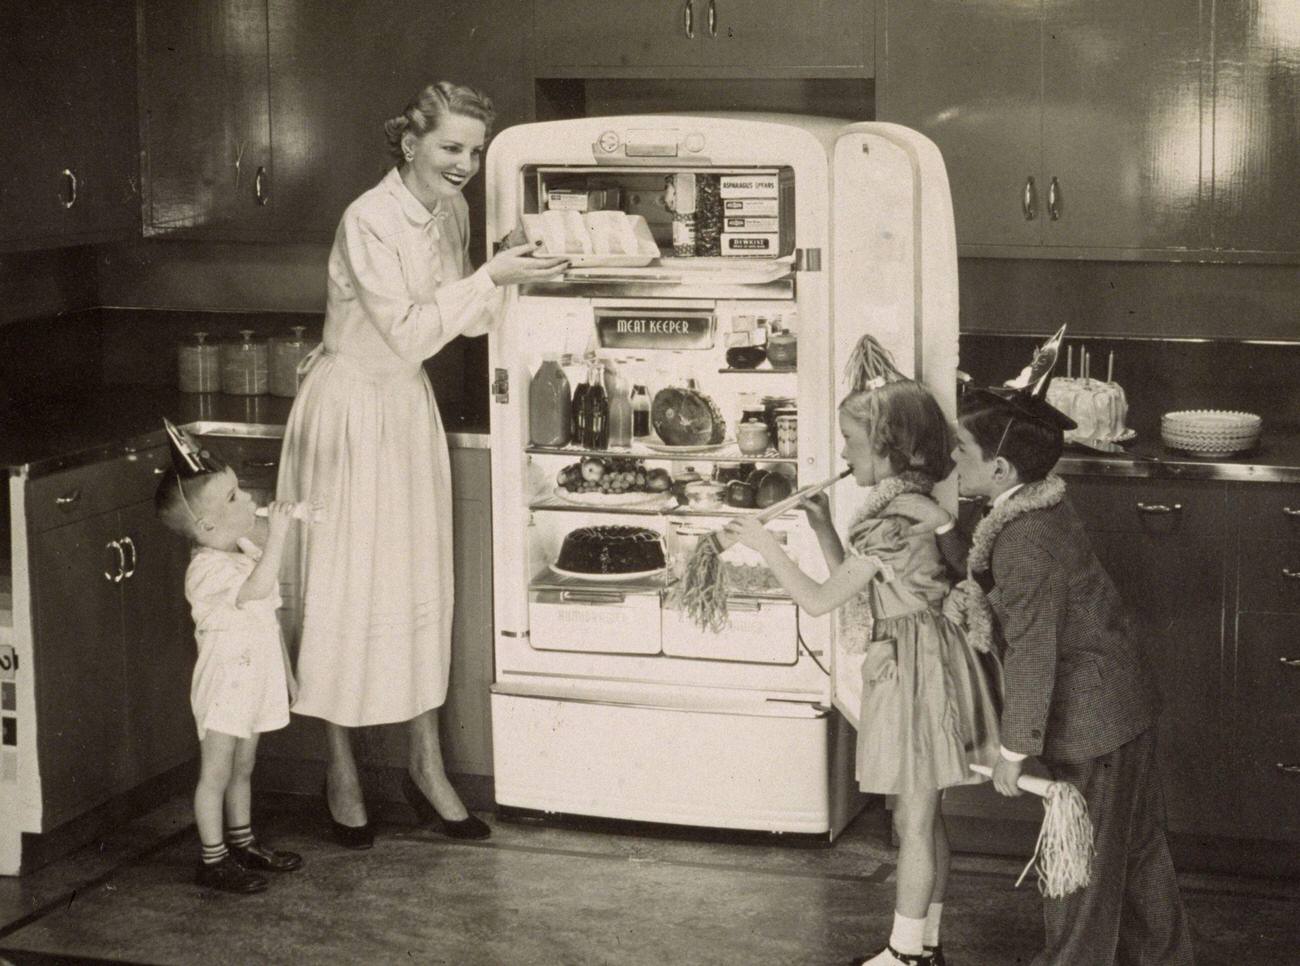 Woman and children with cake from refrigerator, circa 1948.